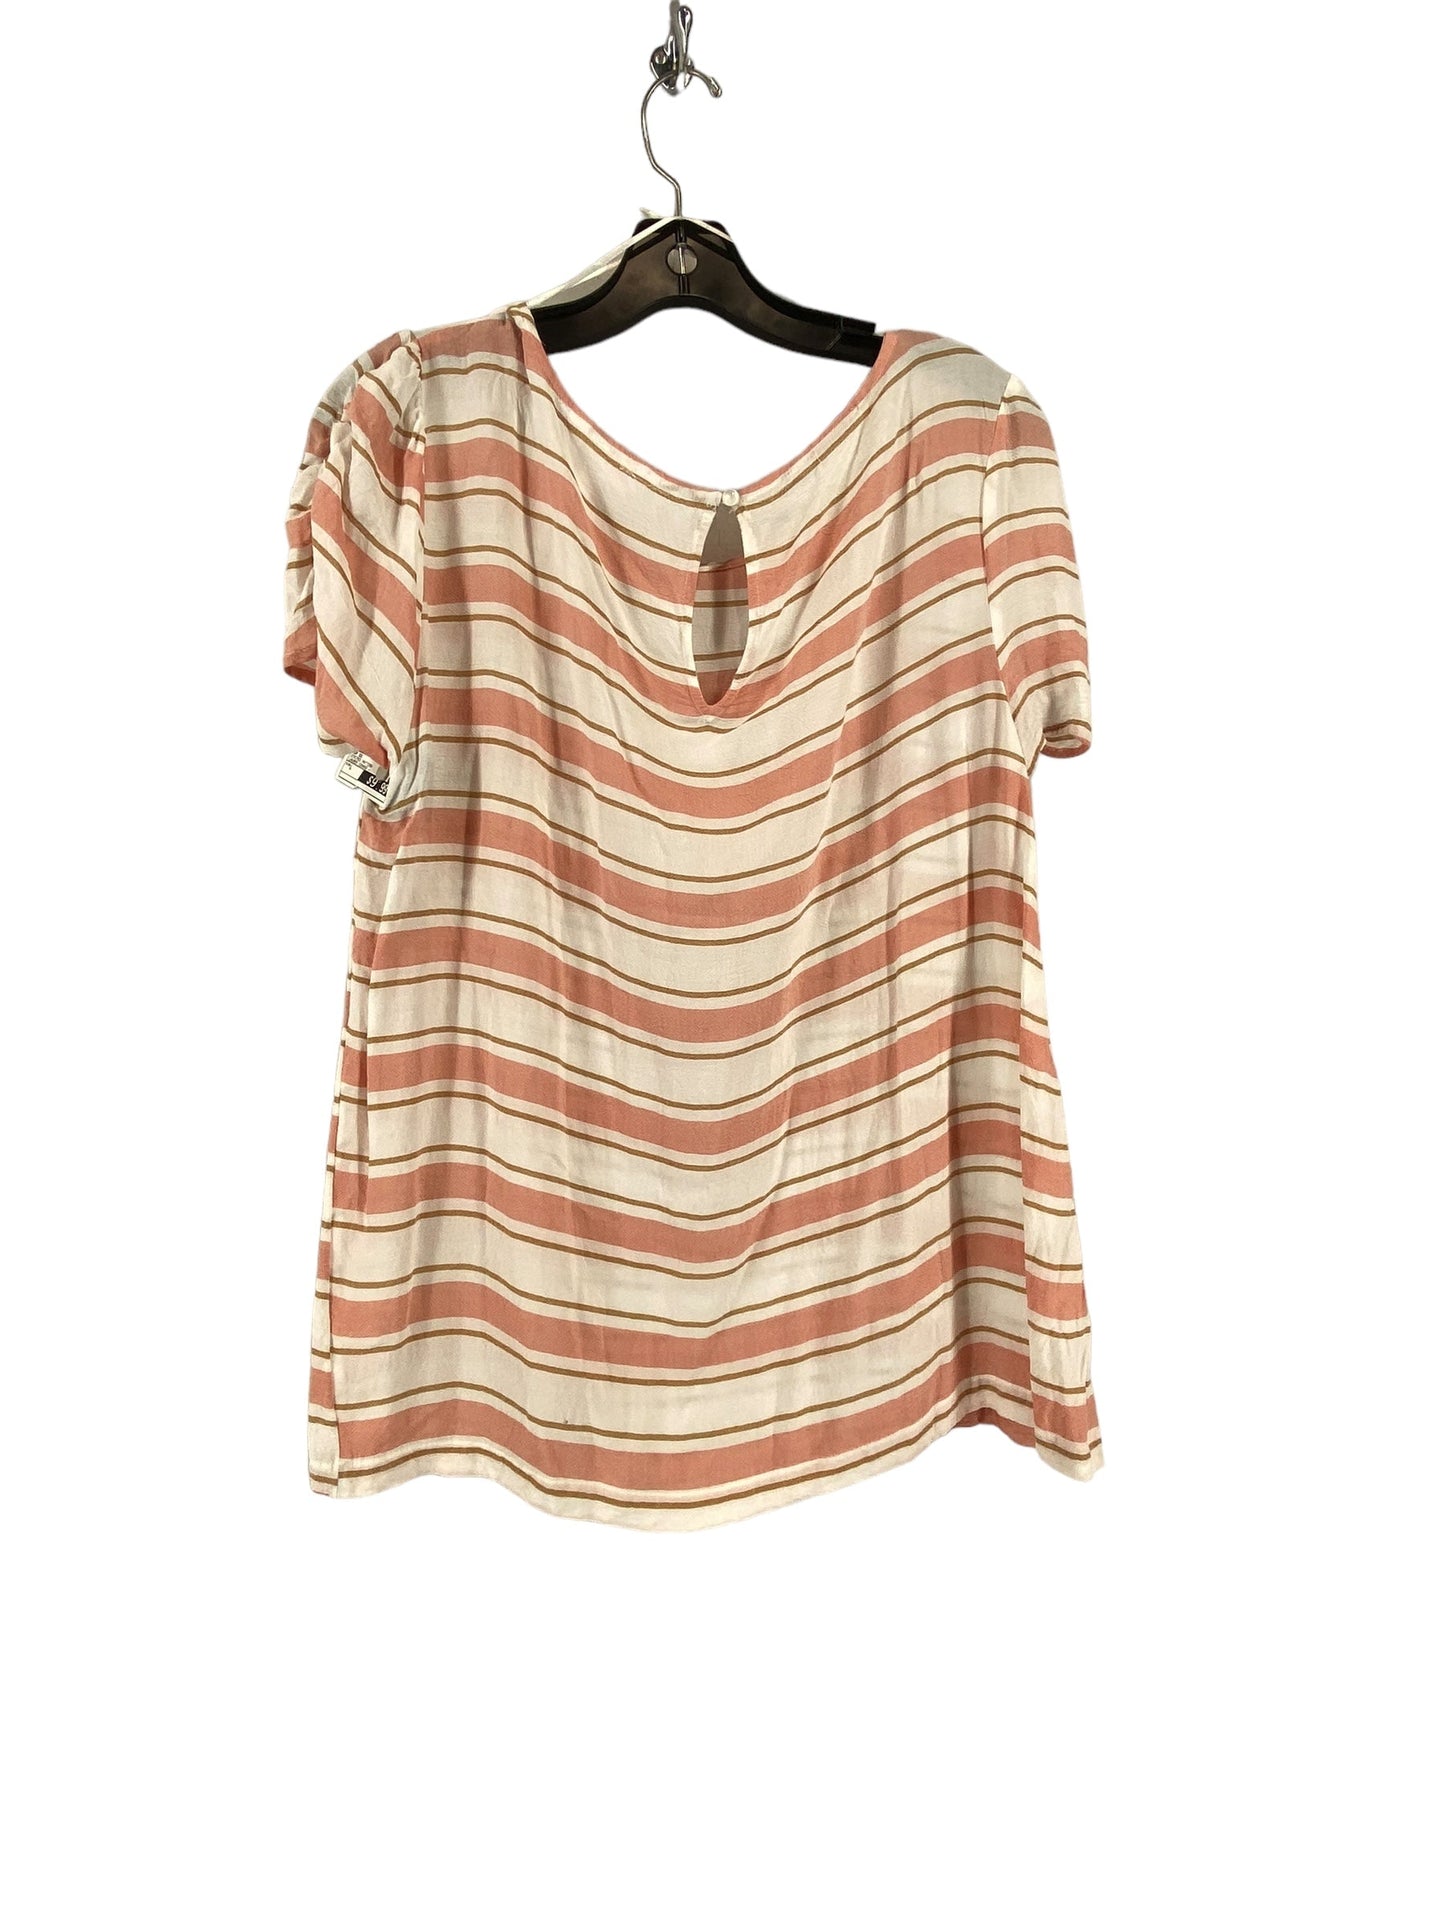 Striped Pattern Top Short Sleeve Clothes Mentor, Size L